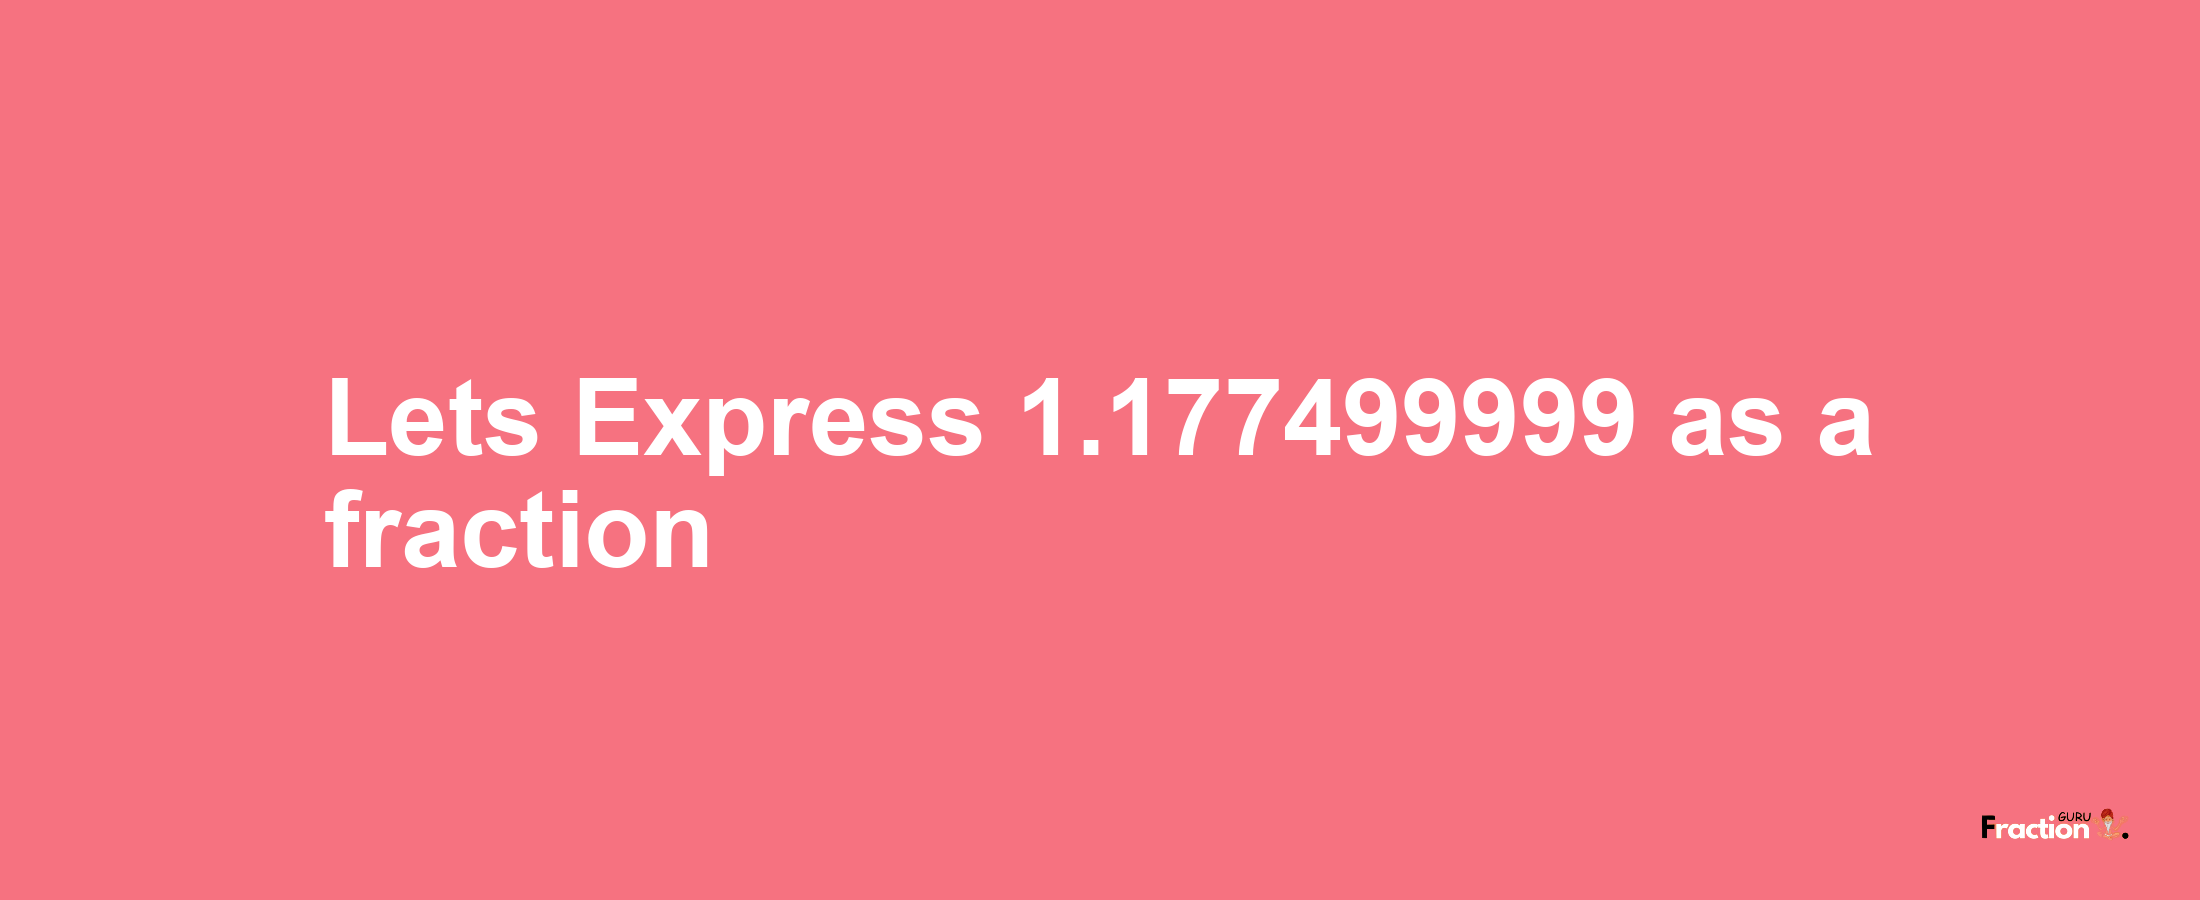 Lets Express 1.177499999 as afraction